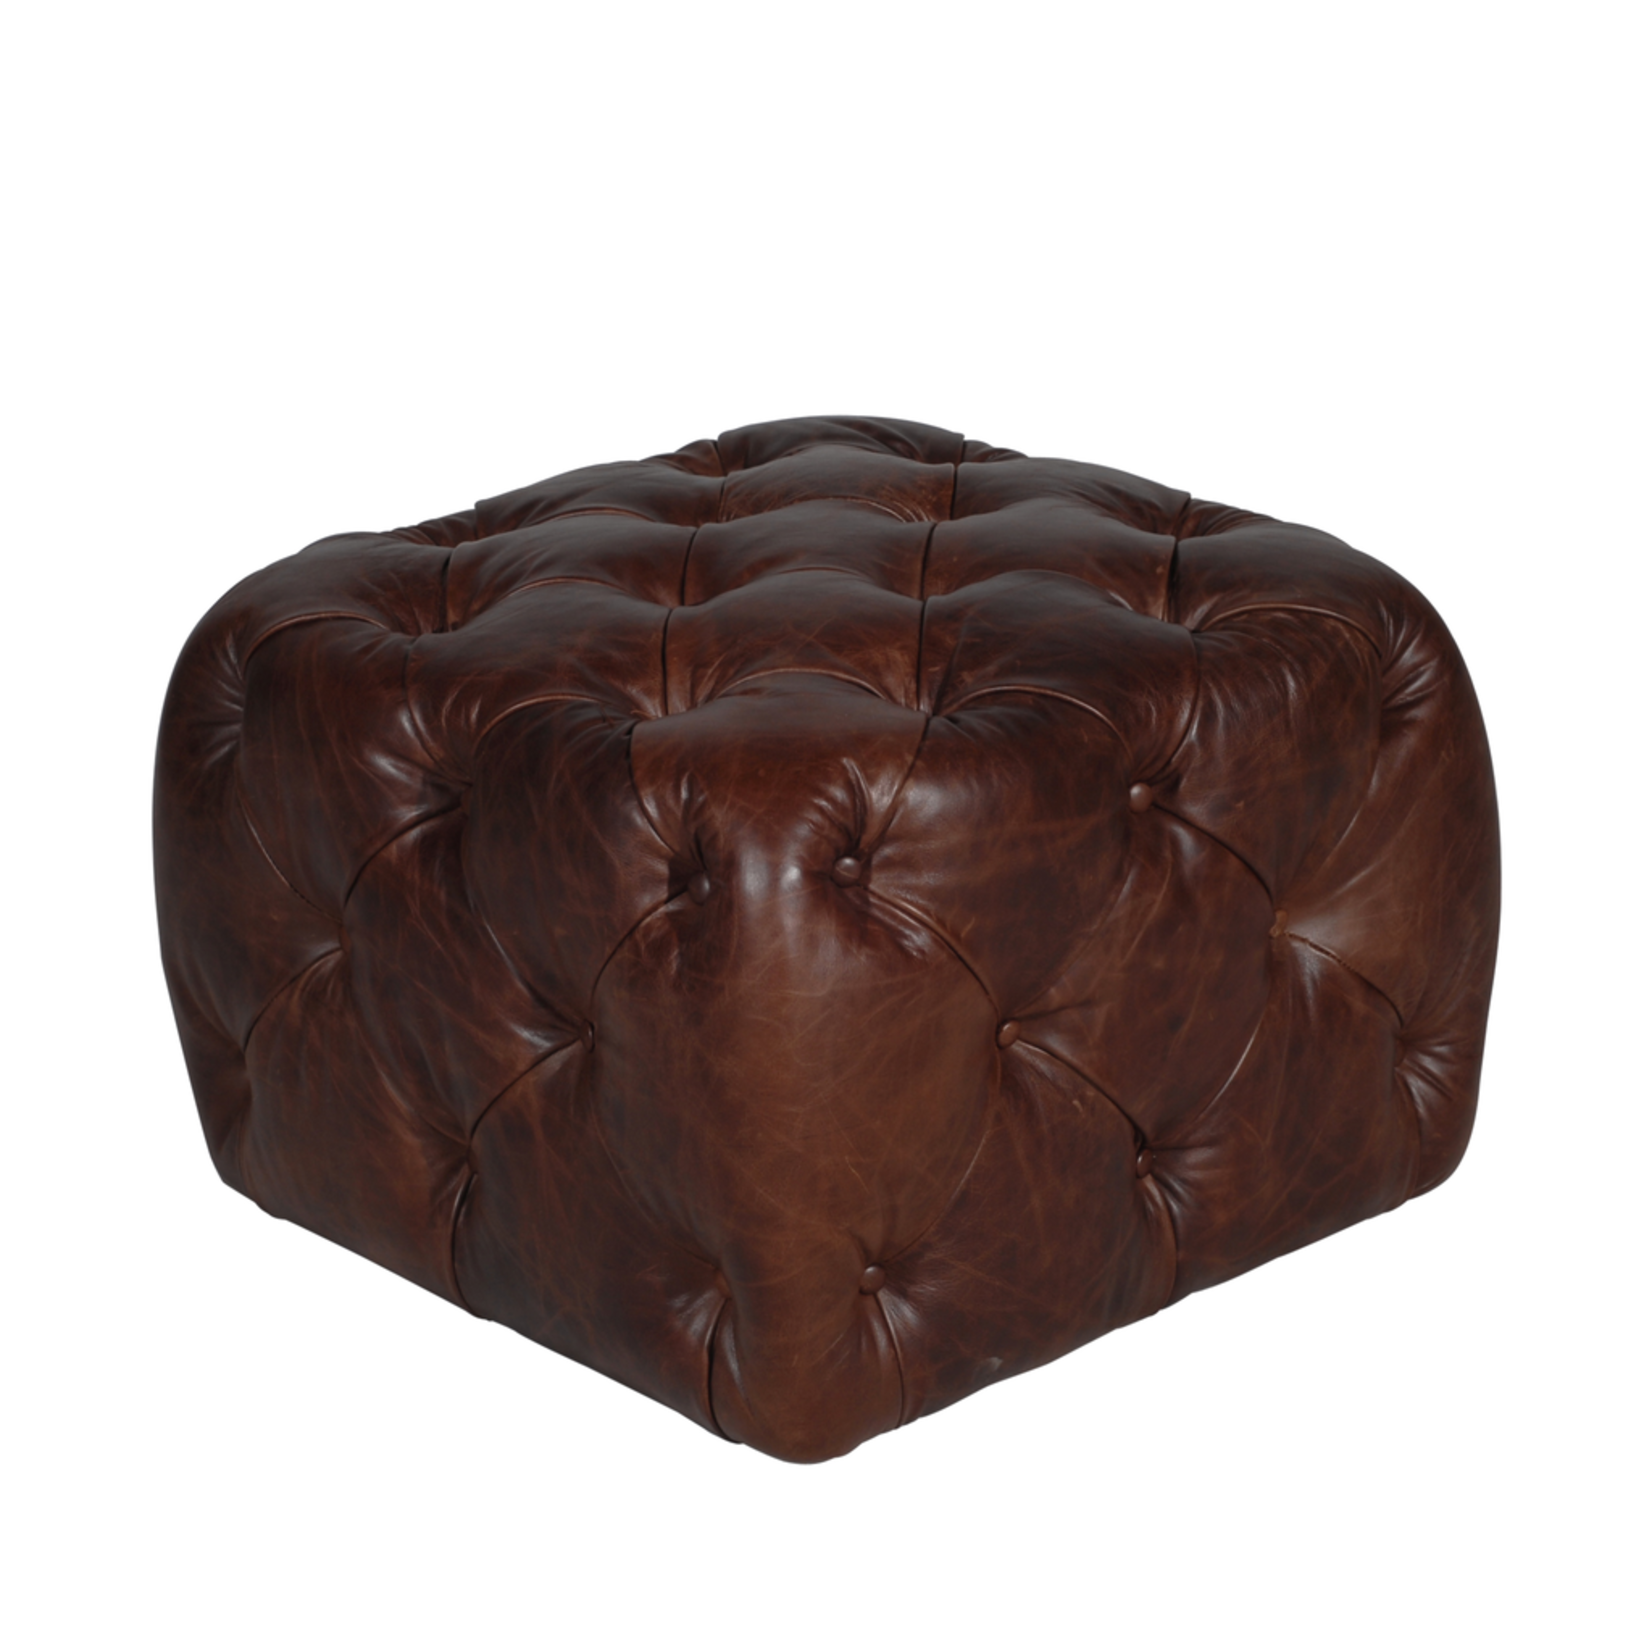 TIMOTHY OULTON BENSON SQUARE SMALL FOOTSTOOL OLD ENGLAND COFFEE